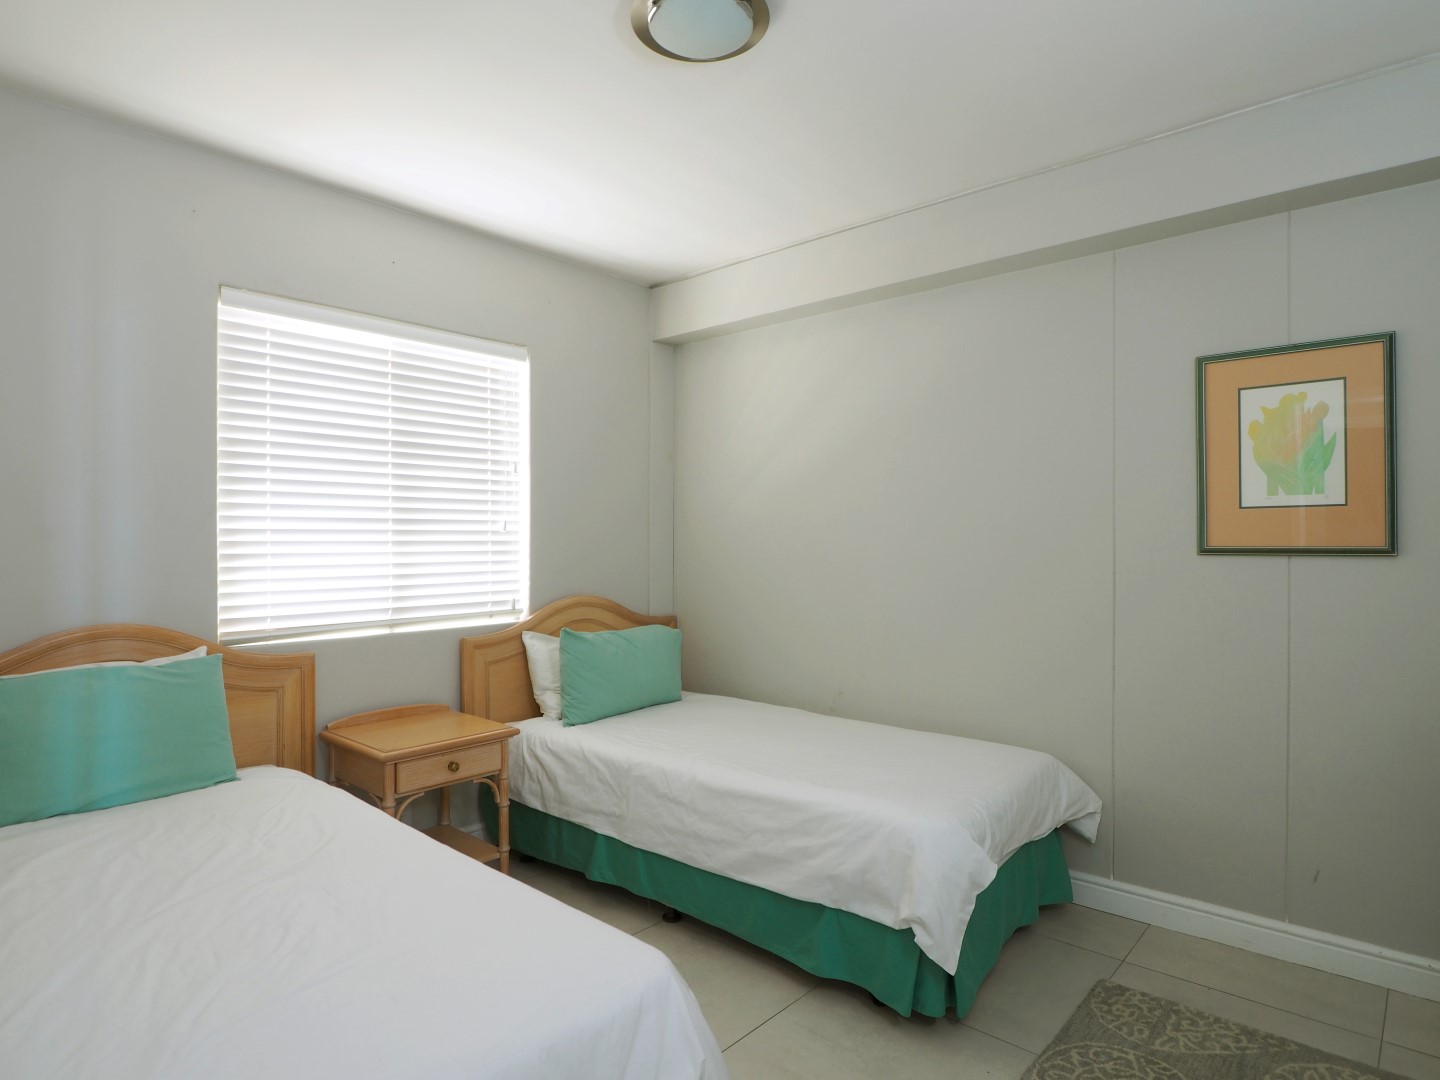 Photo 5 of Dolphin Beach Beauty accommodation in Bloubergstrand, Cape Town with 3 bedrooms and 2 bathrooms